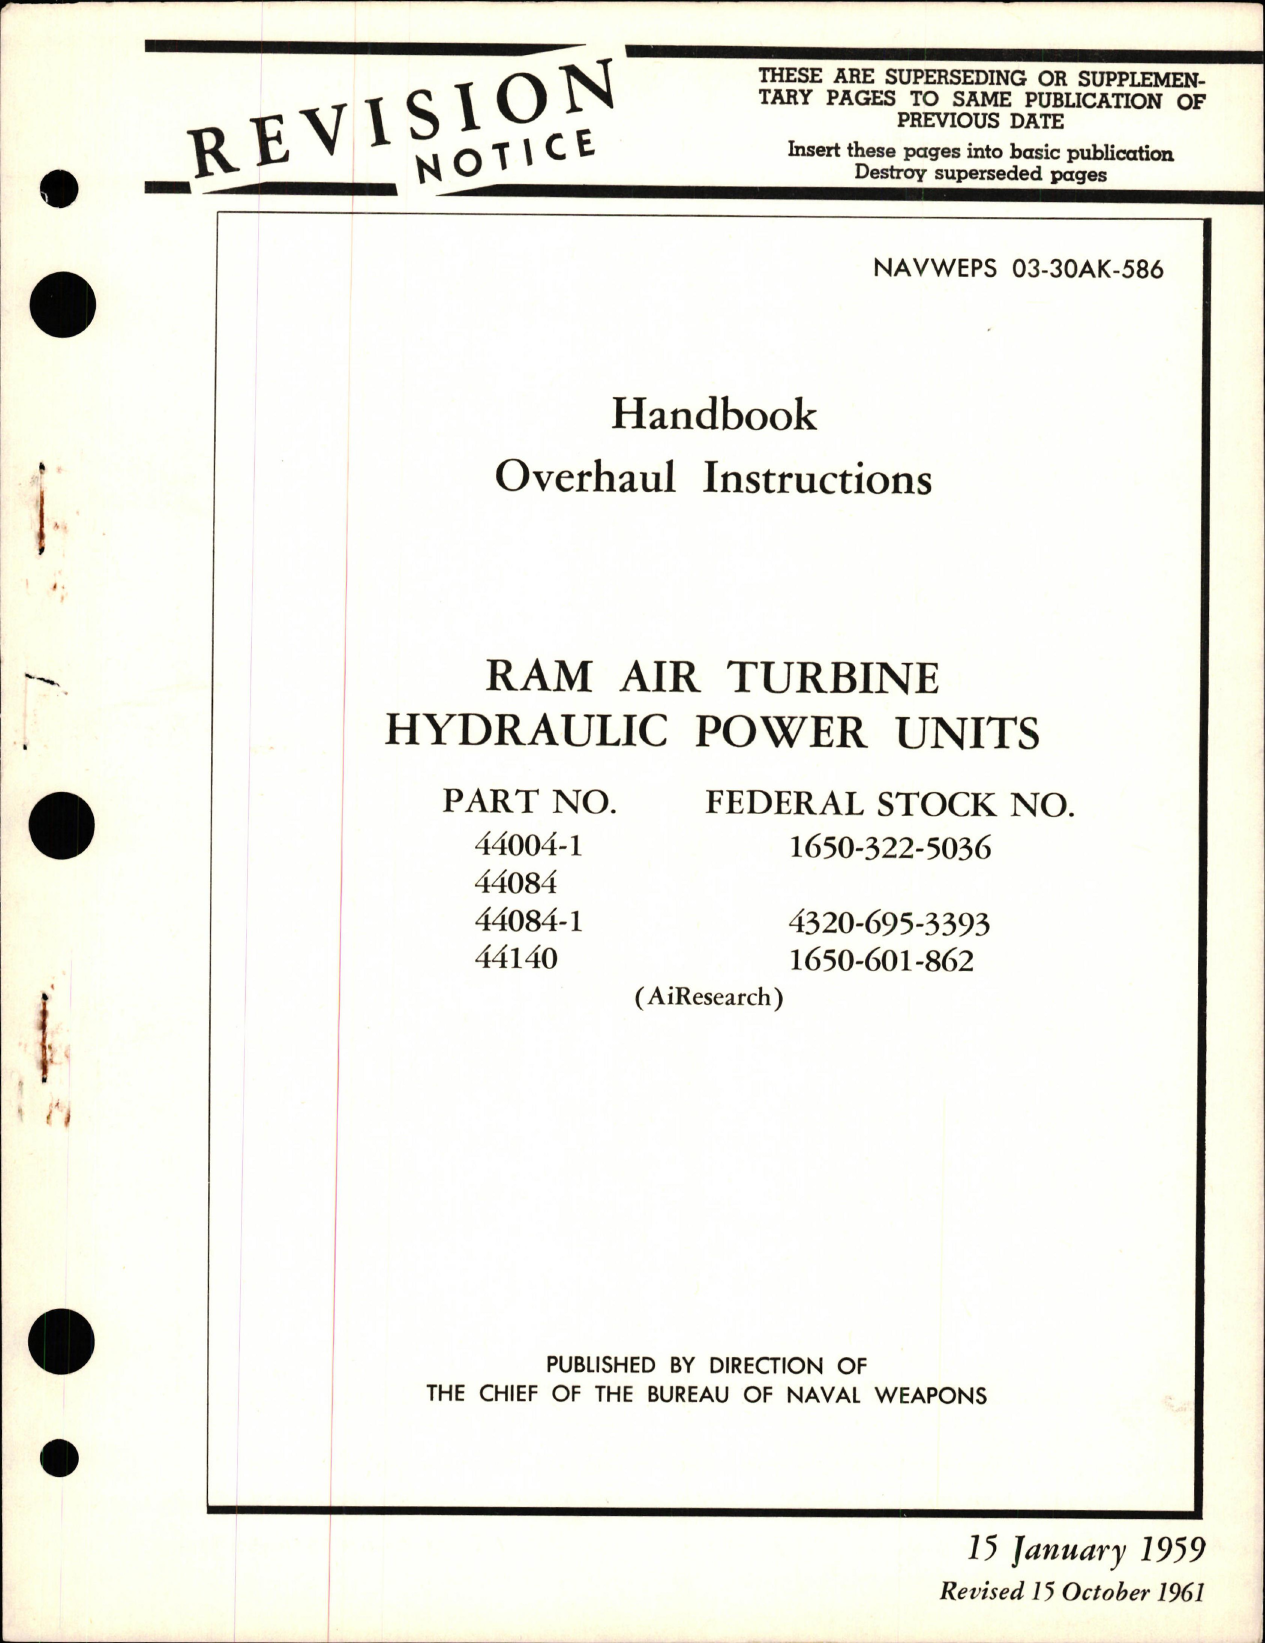 Sample page 1 from AirCorps Library document: Overhaul Instructions for Ram Air Turbine Hydraulic Power Units - Parts 44004-1, 44084, 44084-1, and 44140 